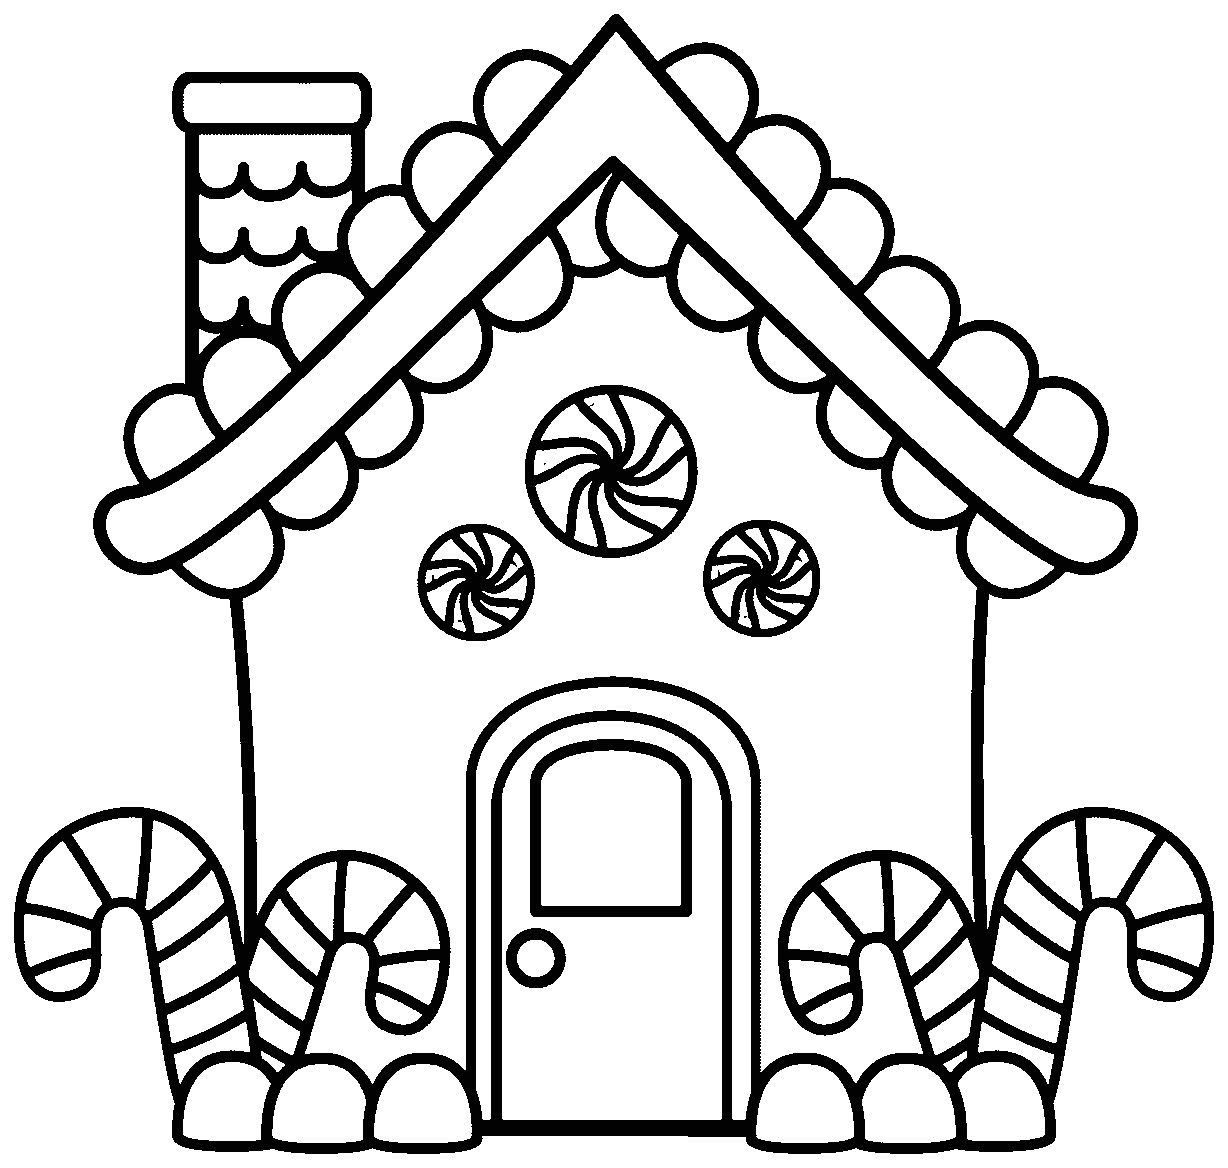 Fantastic Hansel And Gretel Coloring Pages 56 In with Hansel And Gretel Coloring Pages